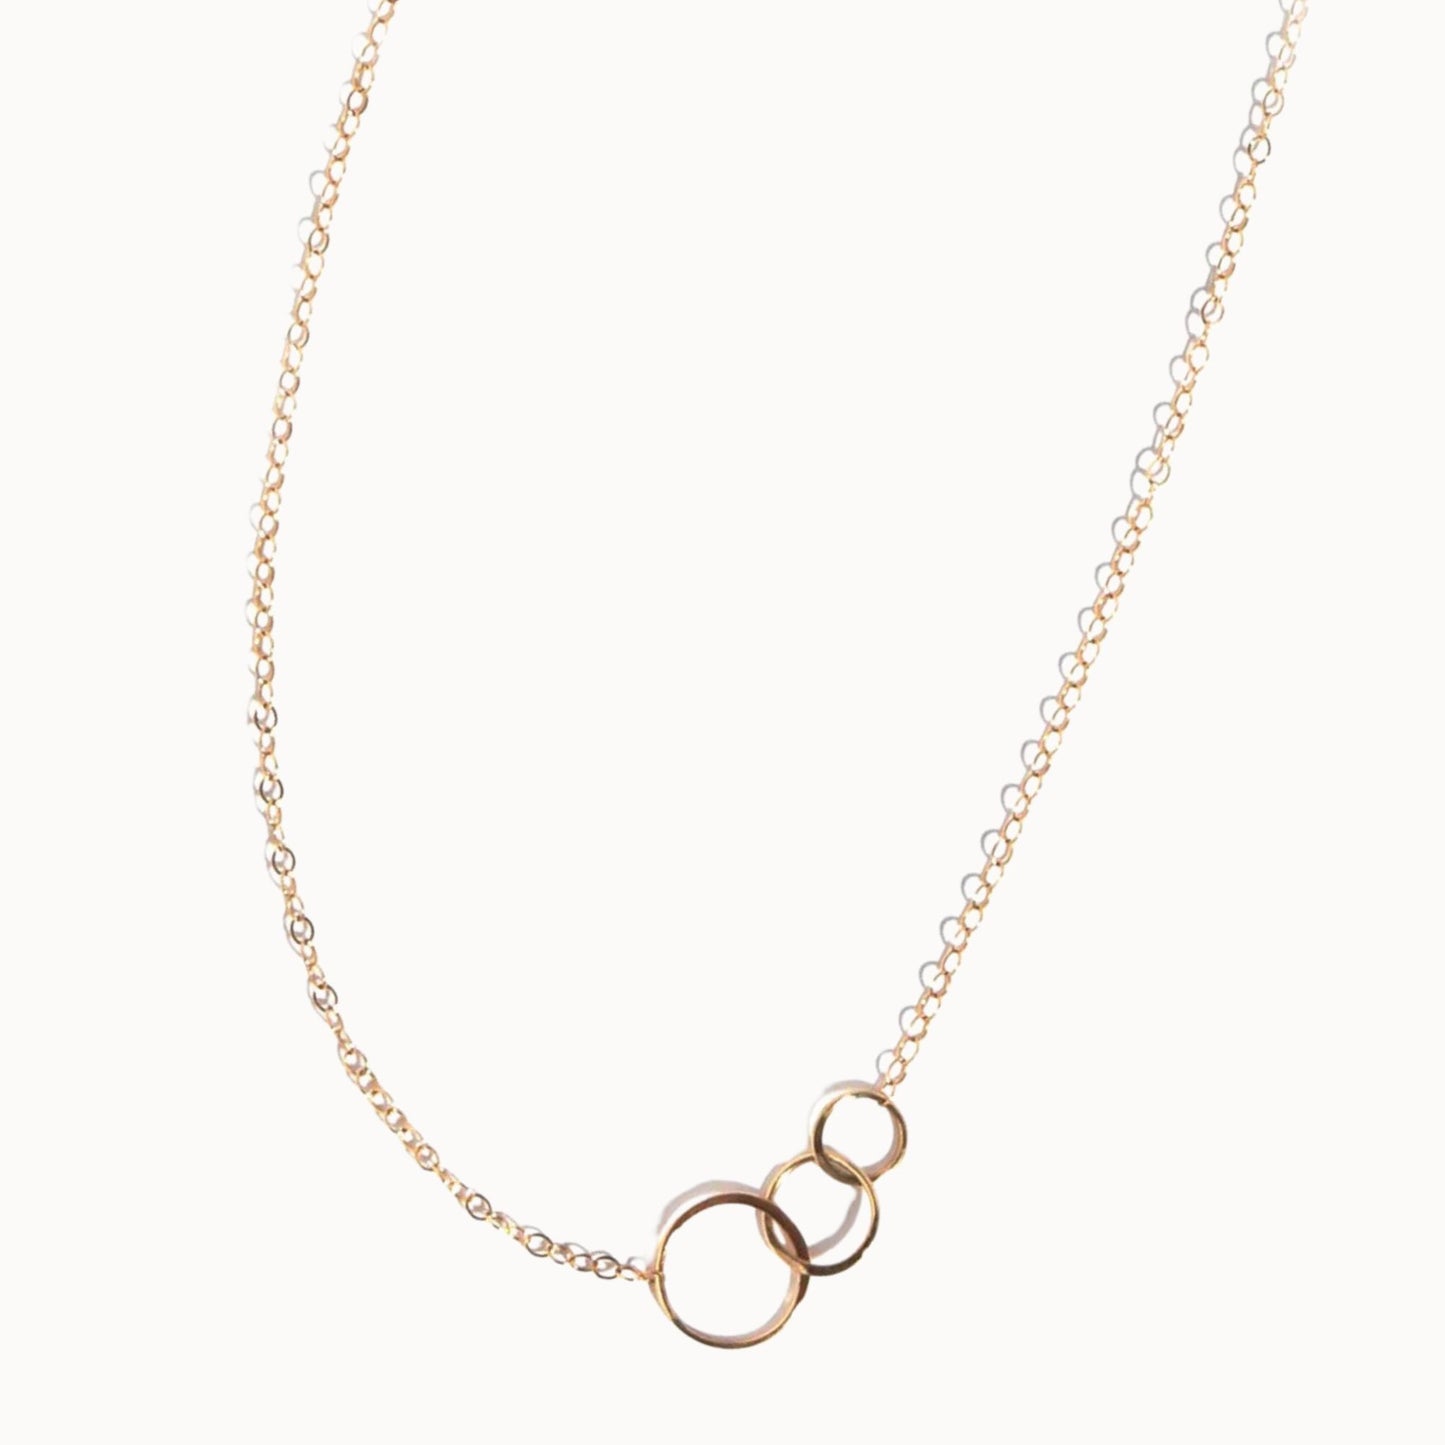 Melissa Joy Manning 14k Gold 16" Necklace with Three Graduated Hammered Rings